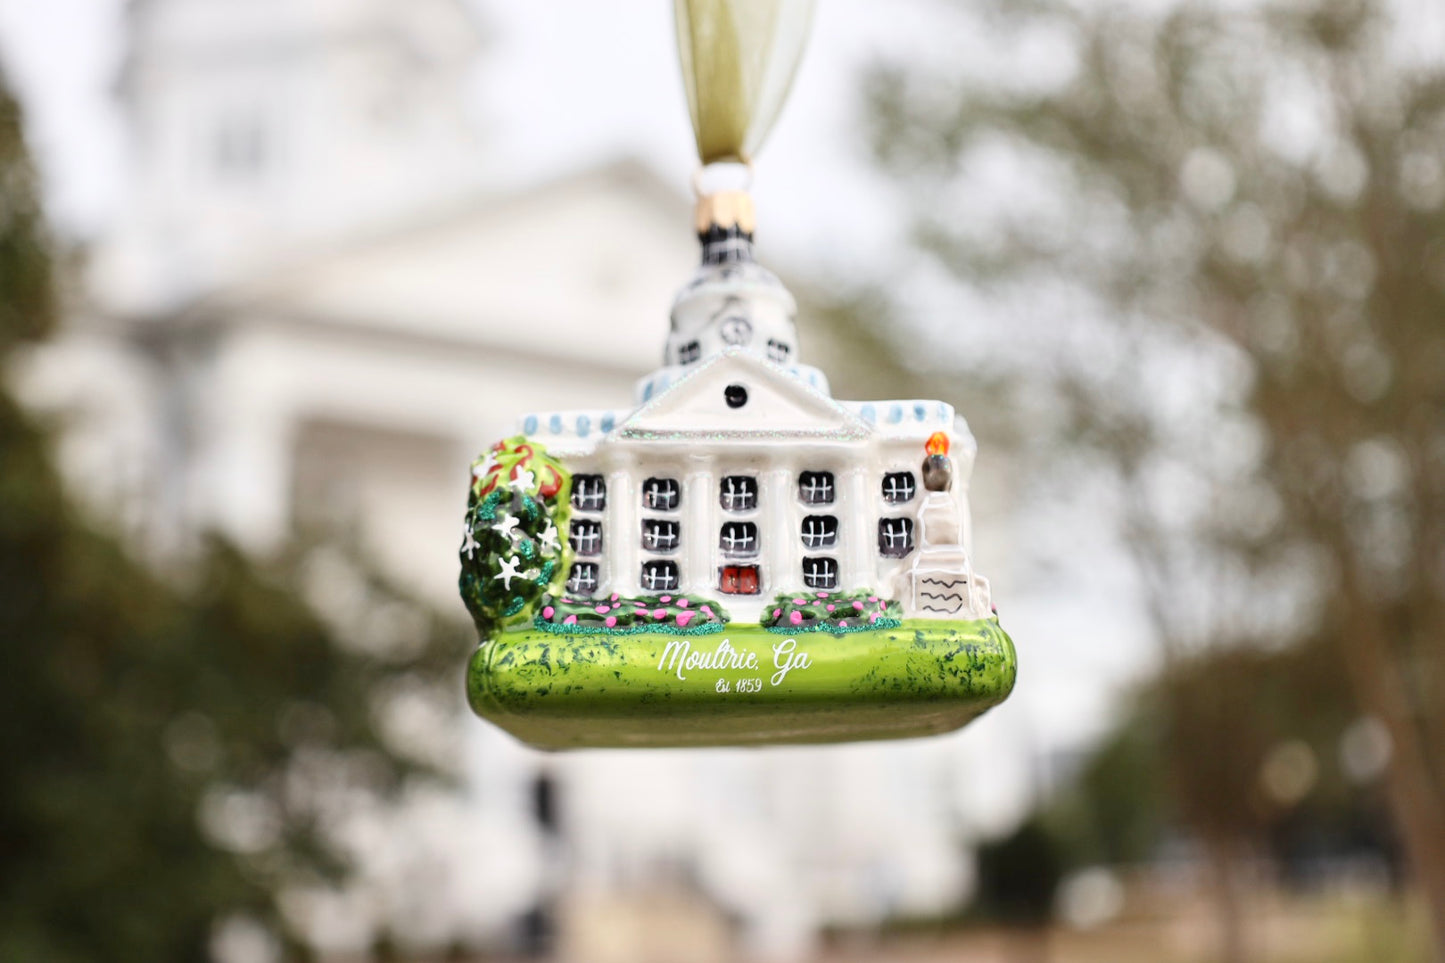 Moultrie, GA Courthouse 3D Ornament